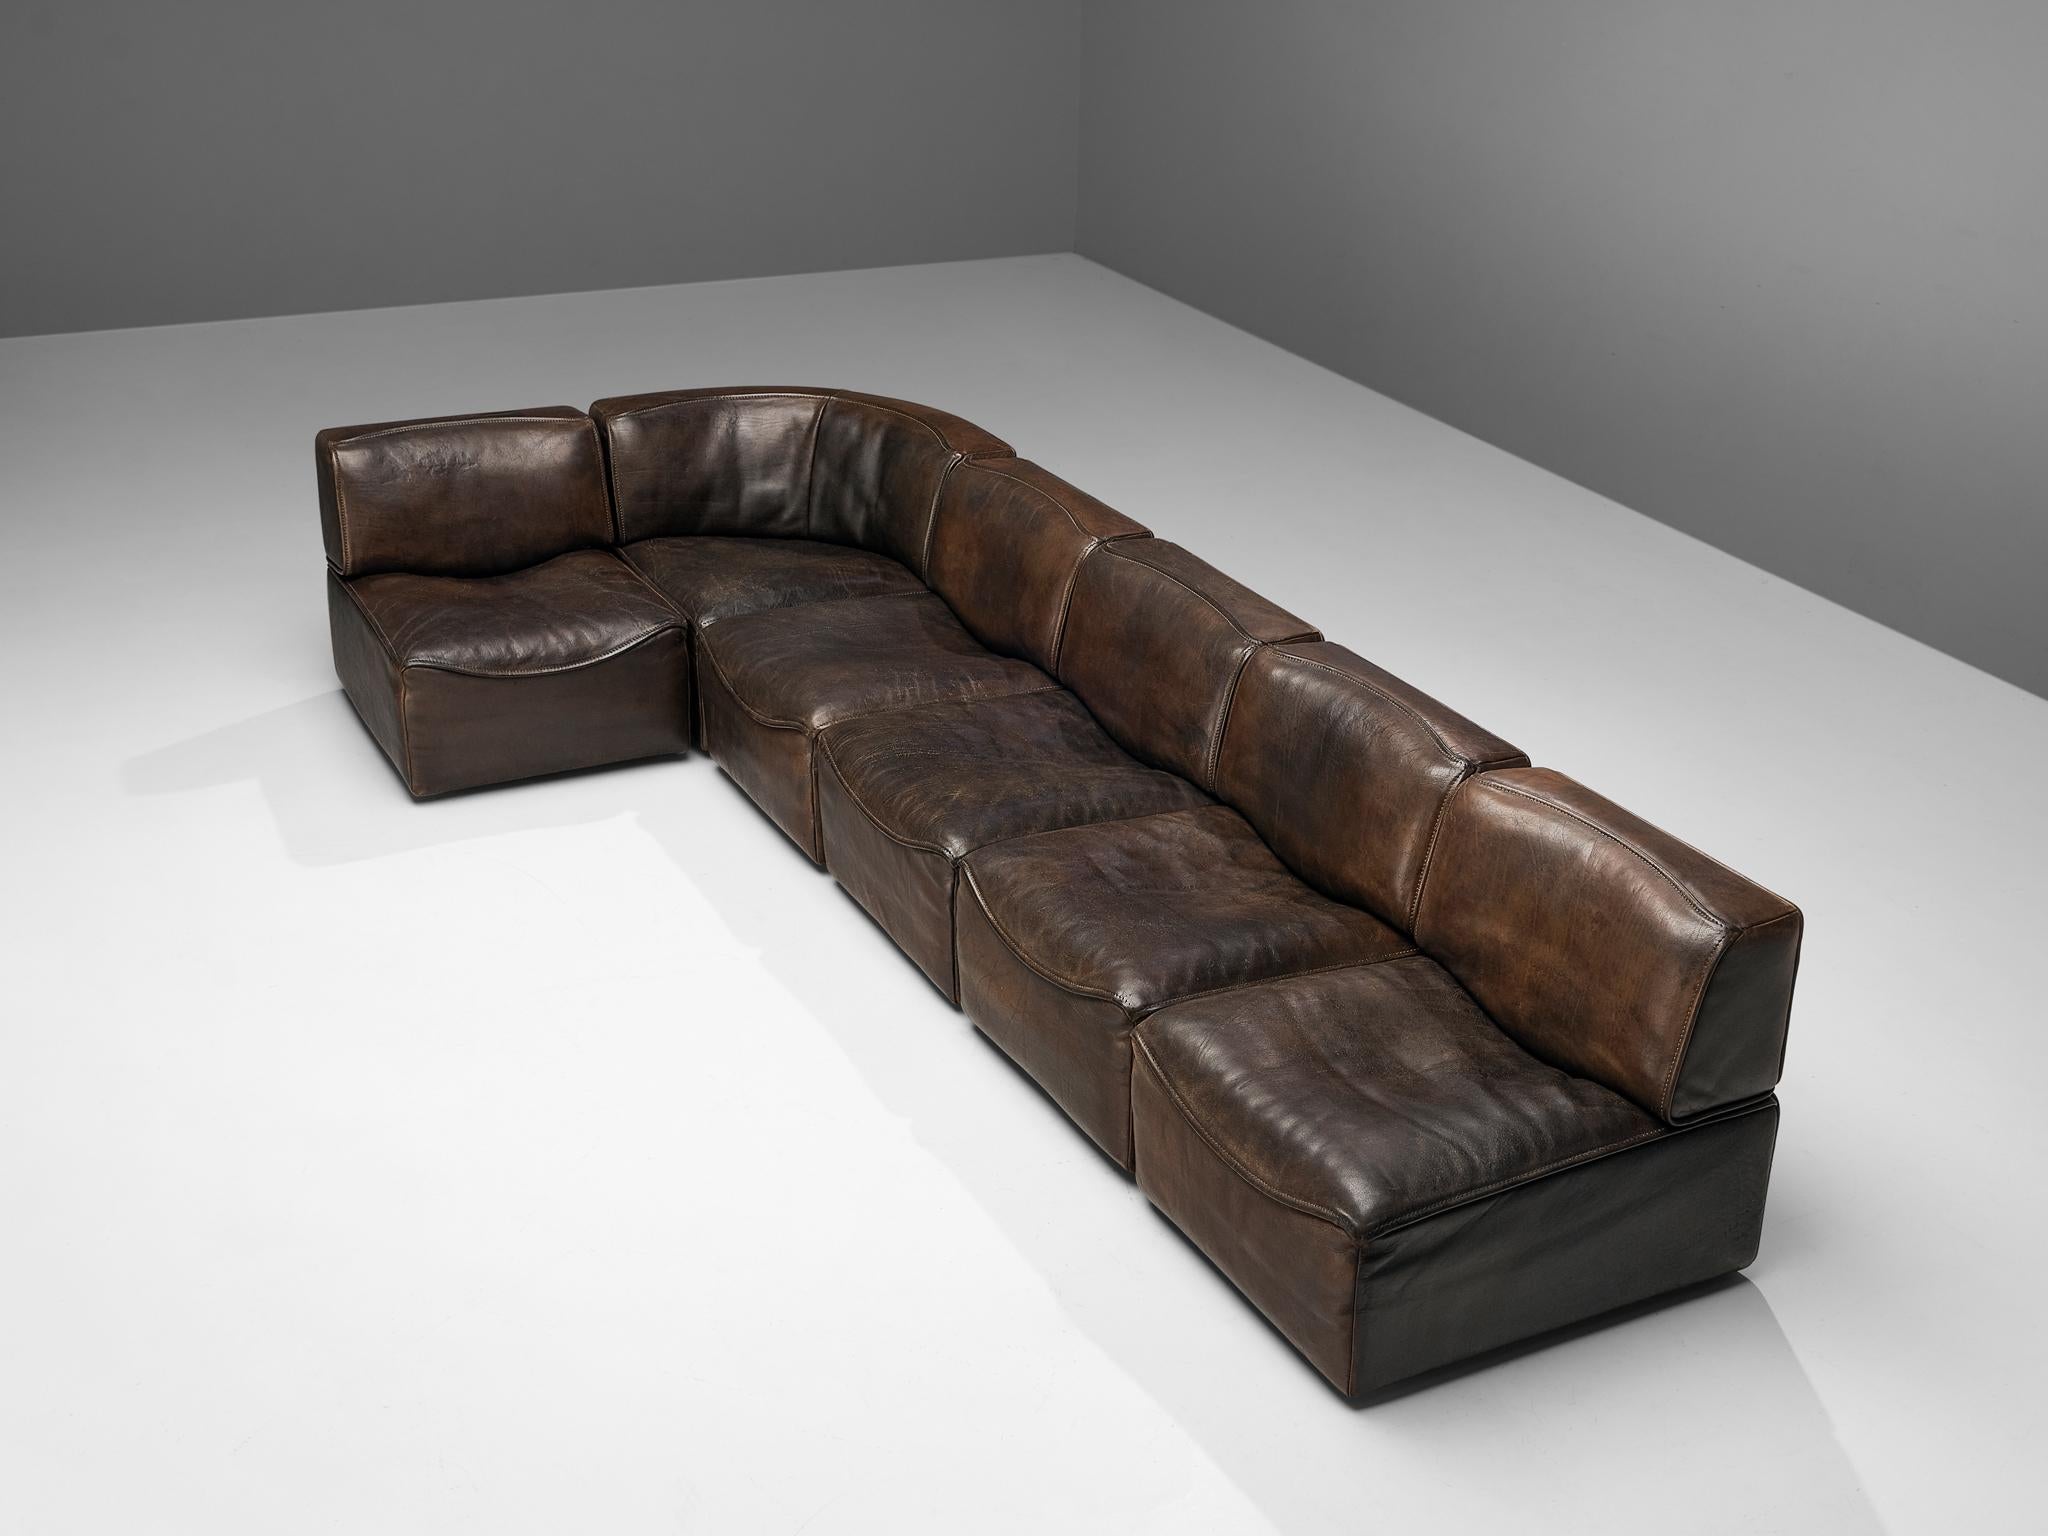 De Sede, sectional sofa model 'DS-15', brown leather, Switzerland, 1970s.

This high quality sectional sofa designed by DeSede in the 1970s contains out of one corner element and five normal elements, which make it possible to arrange this sofa to